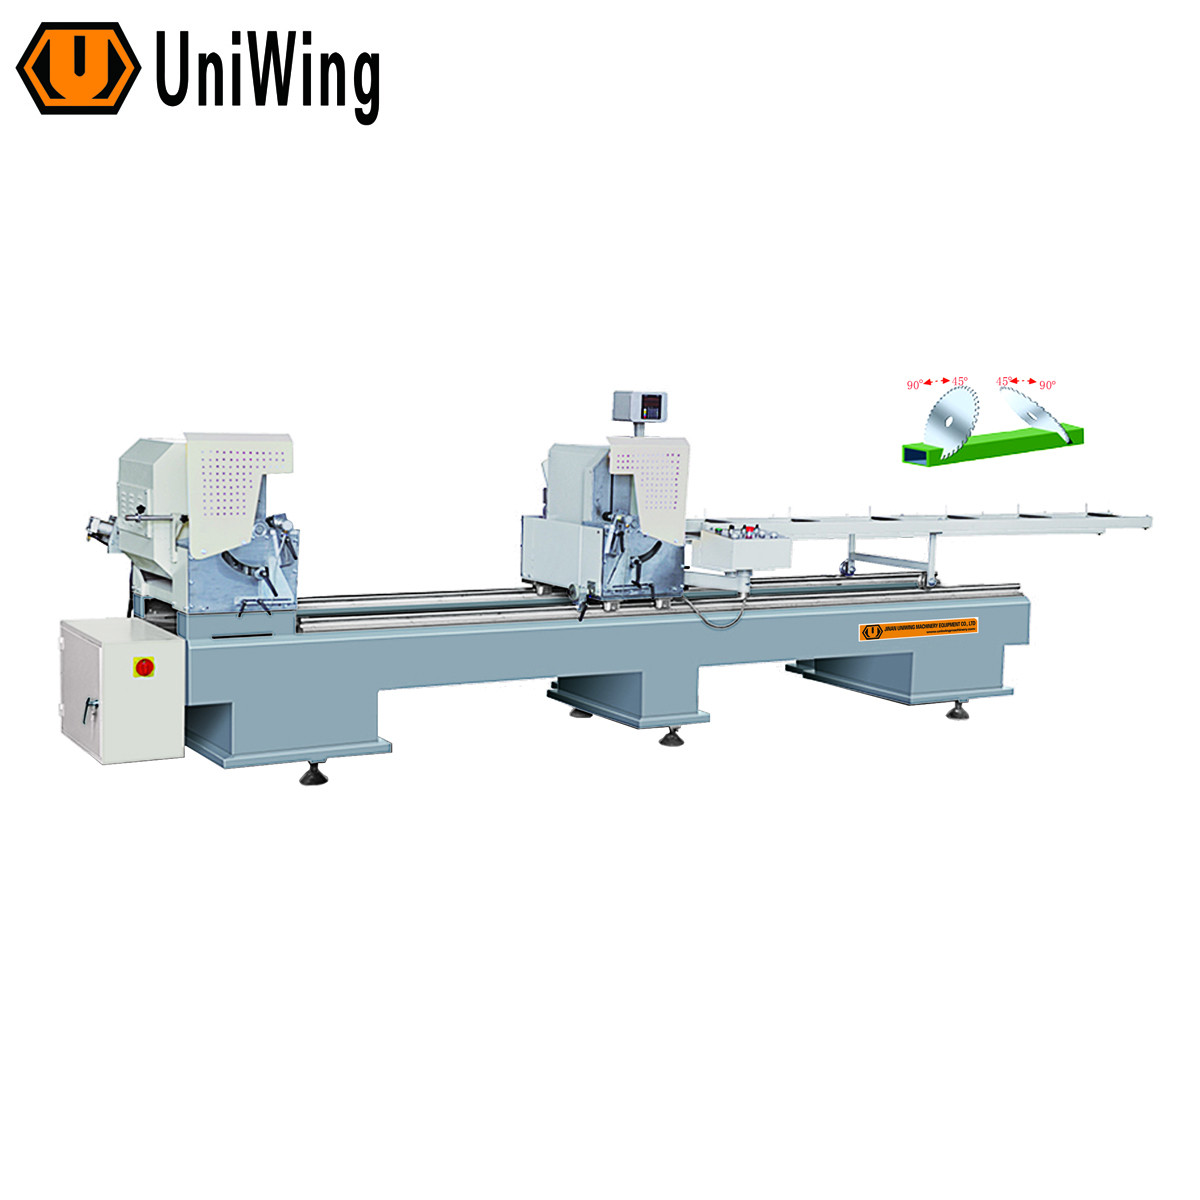 Double Head Cutting Machine for uPVC window and door profile cutting